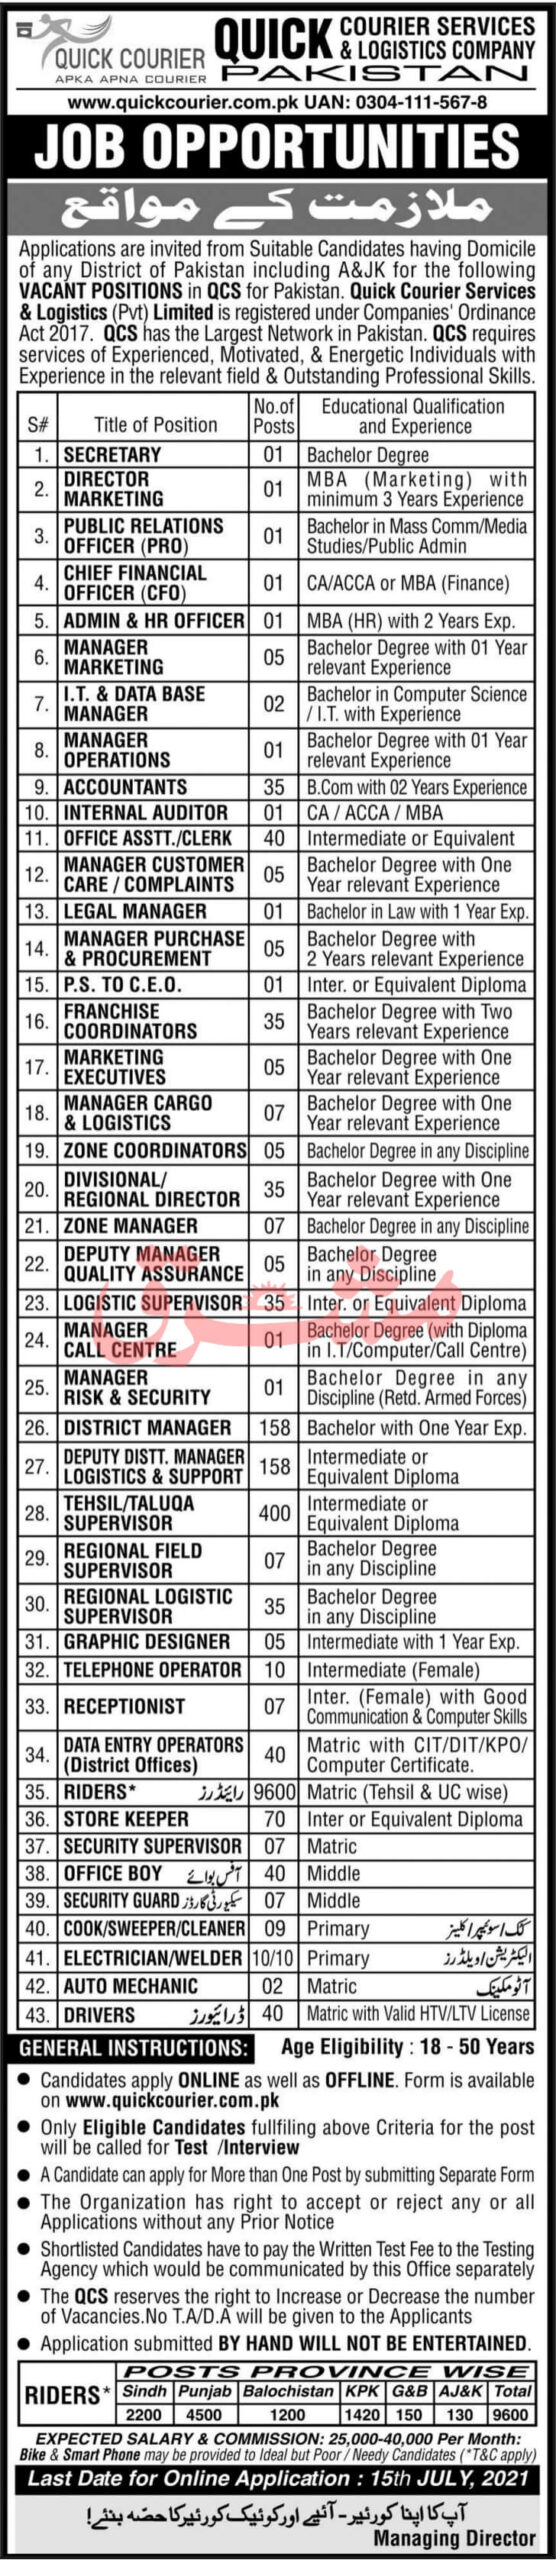 Quick Courier Services and Logistics Company Jobs 2021 Apply Online